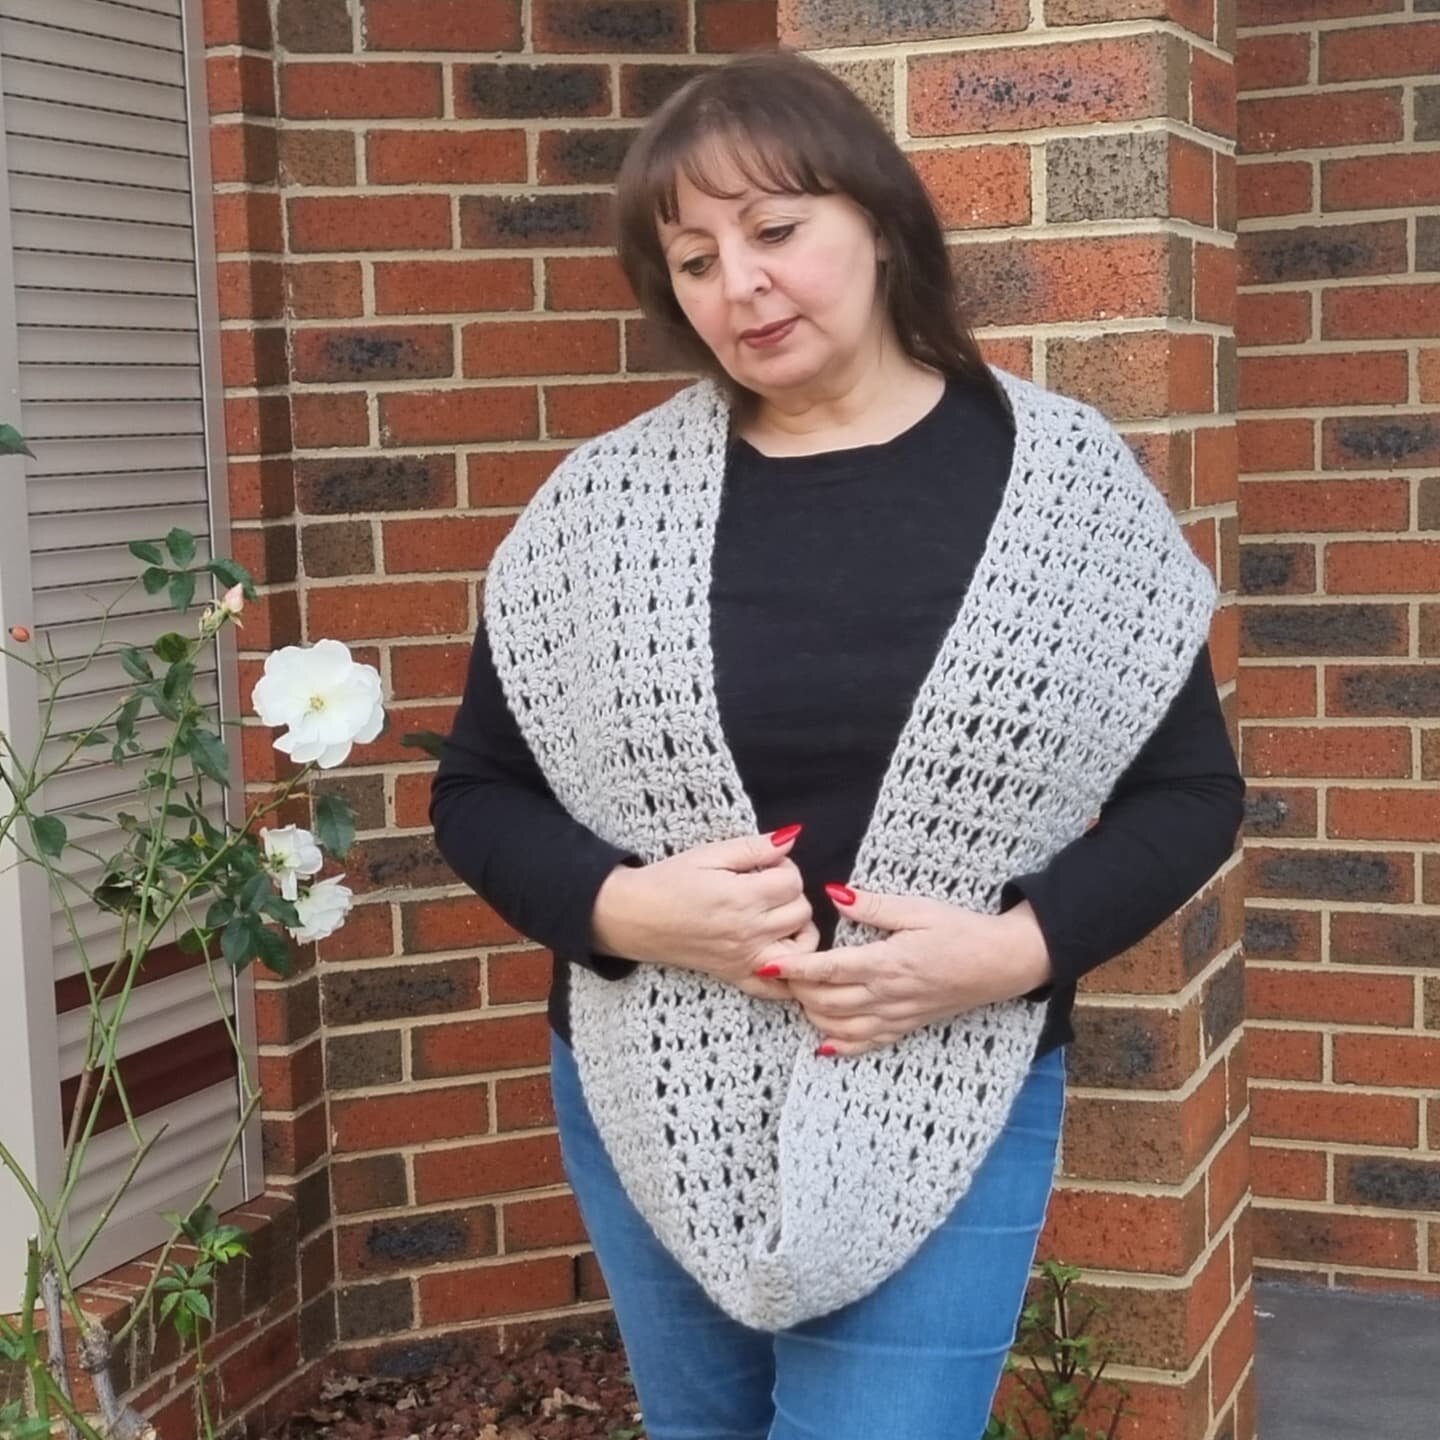 Would you like to create this gorgeous infinity scarf?  Or purchase a ready made one, then head over to Wow Crochet Designs website.  20% off for 2 weeks only.